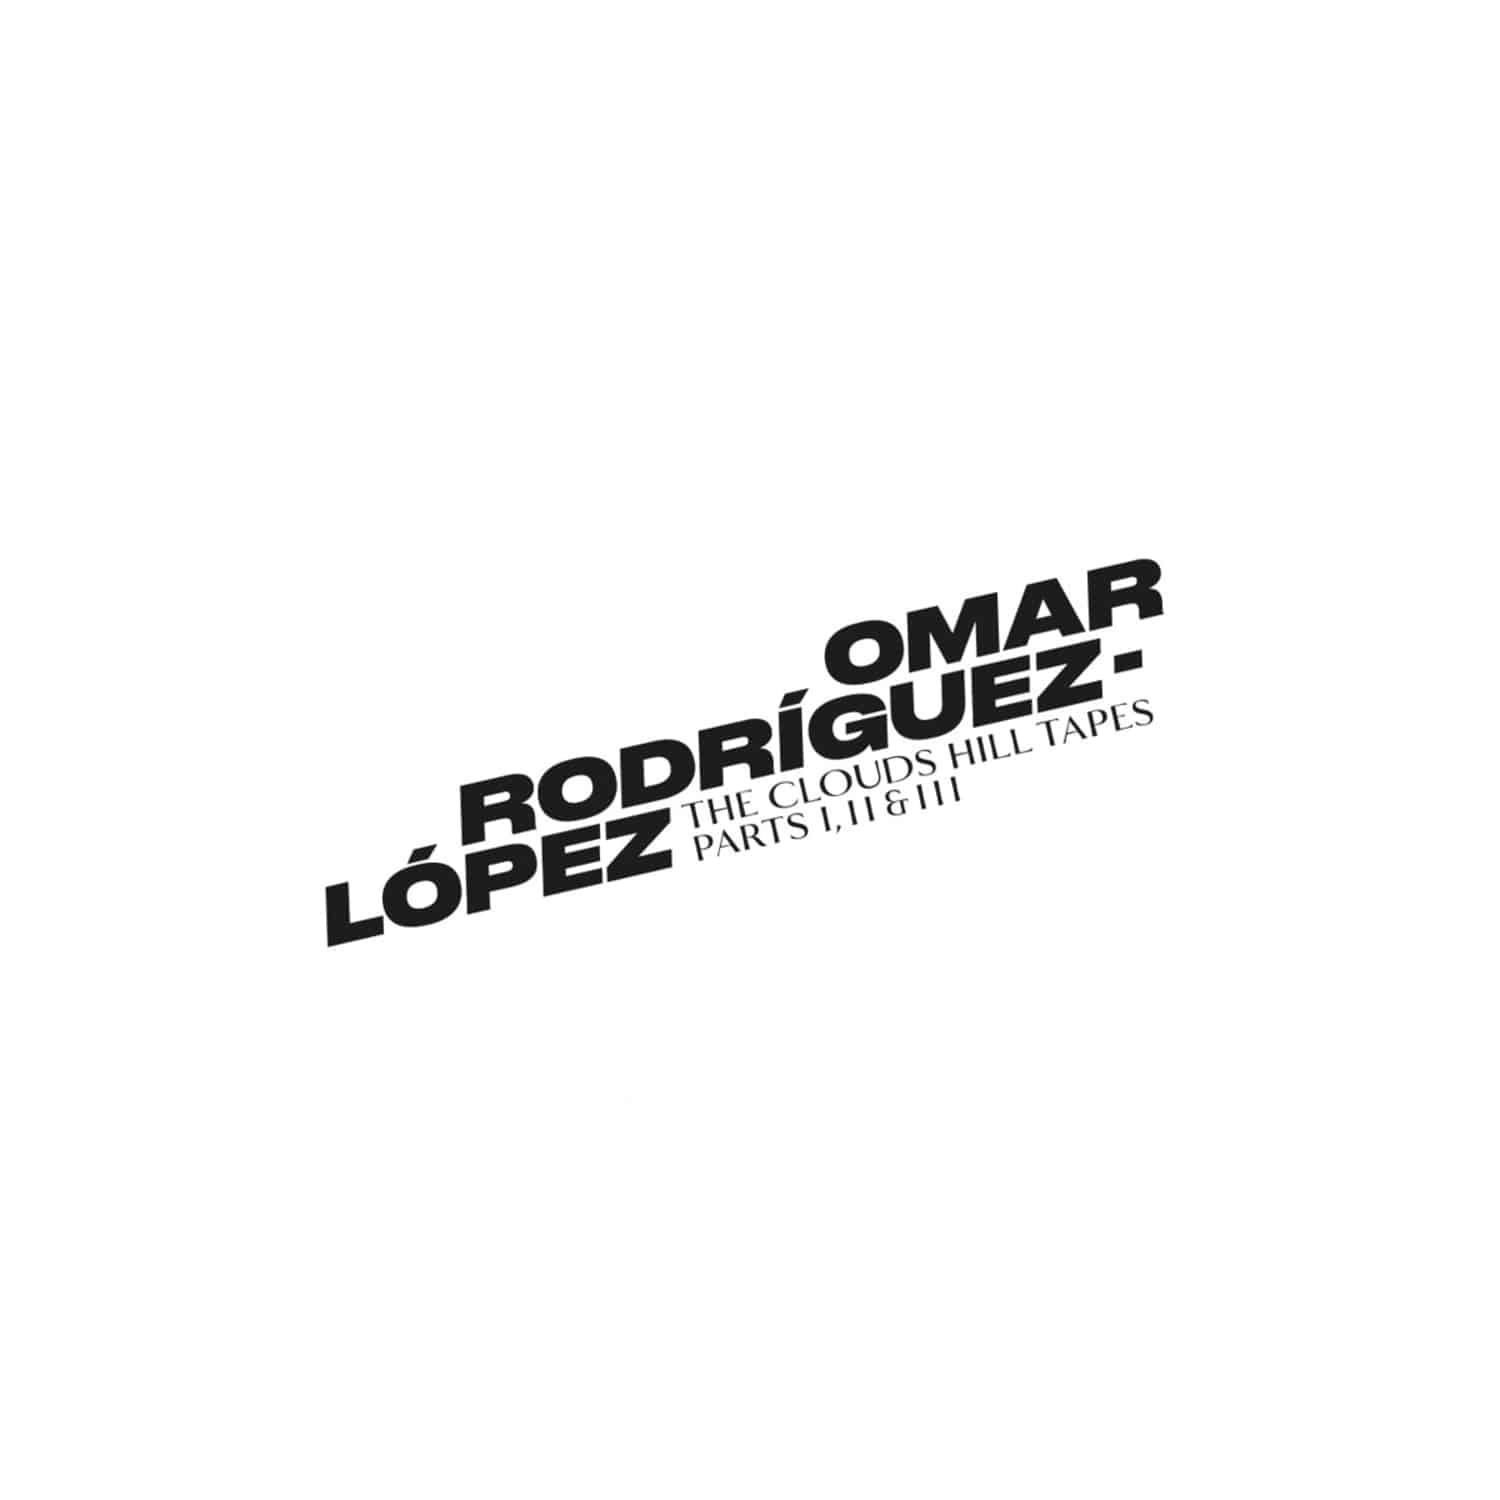 Omar Rodriguez-Lopez - THE CLOUDS HILL TAPES PTS.I, II & III 